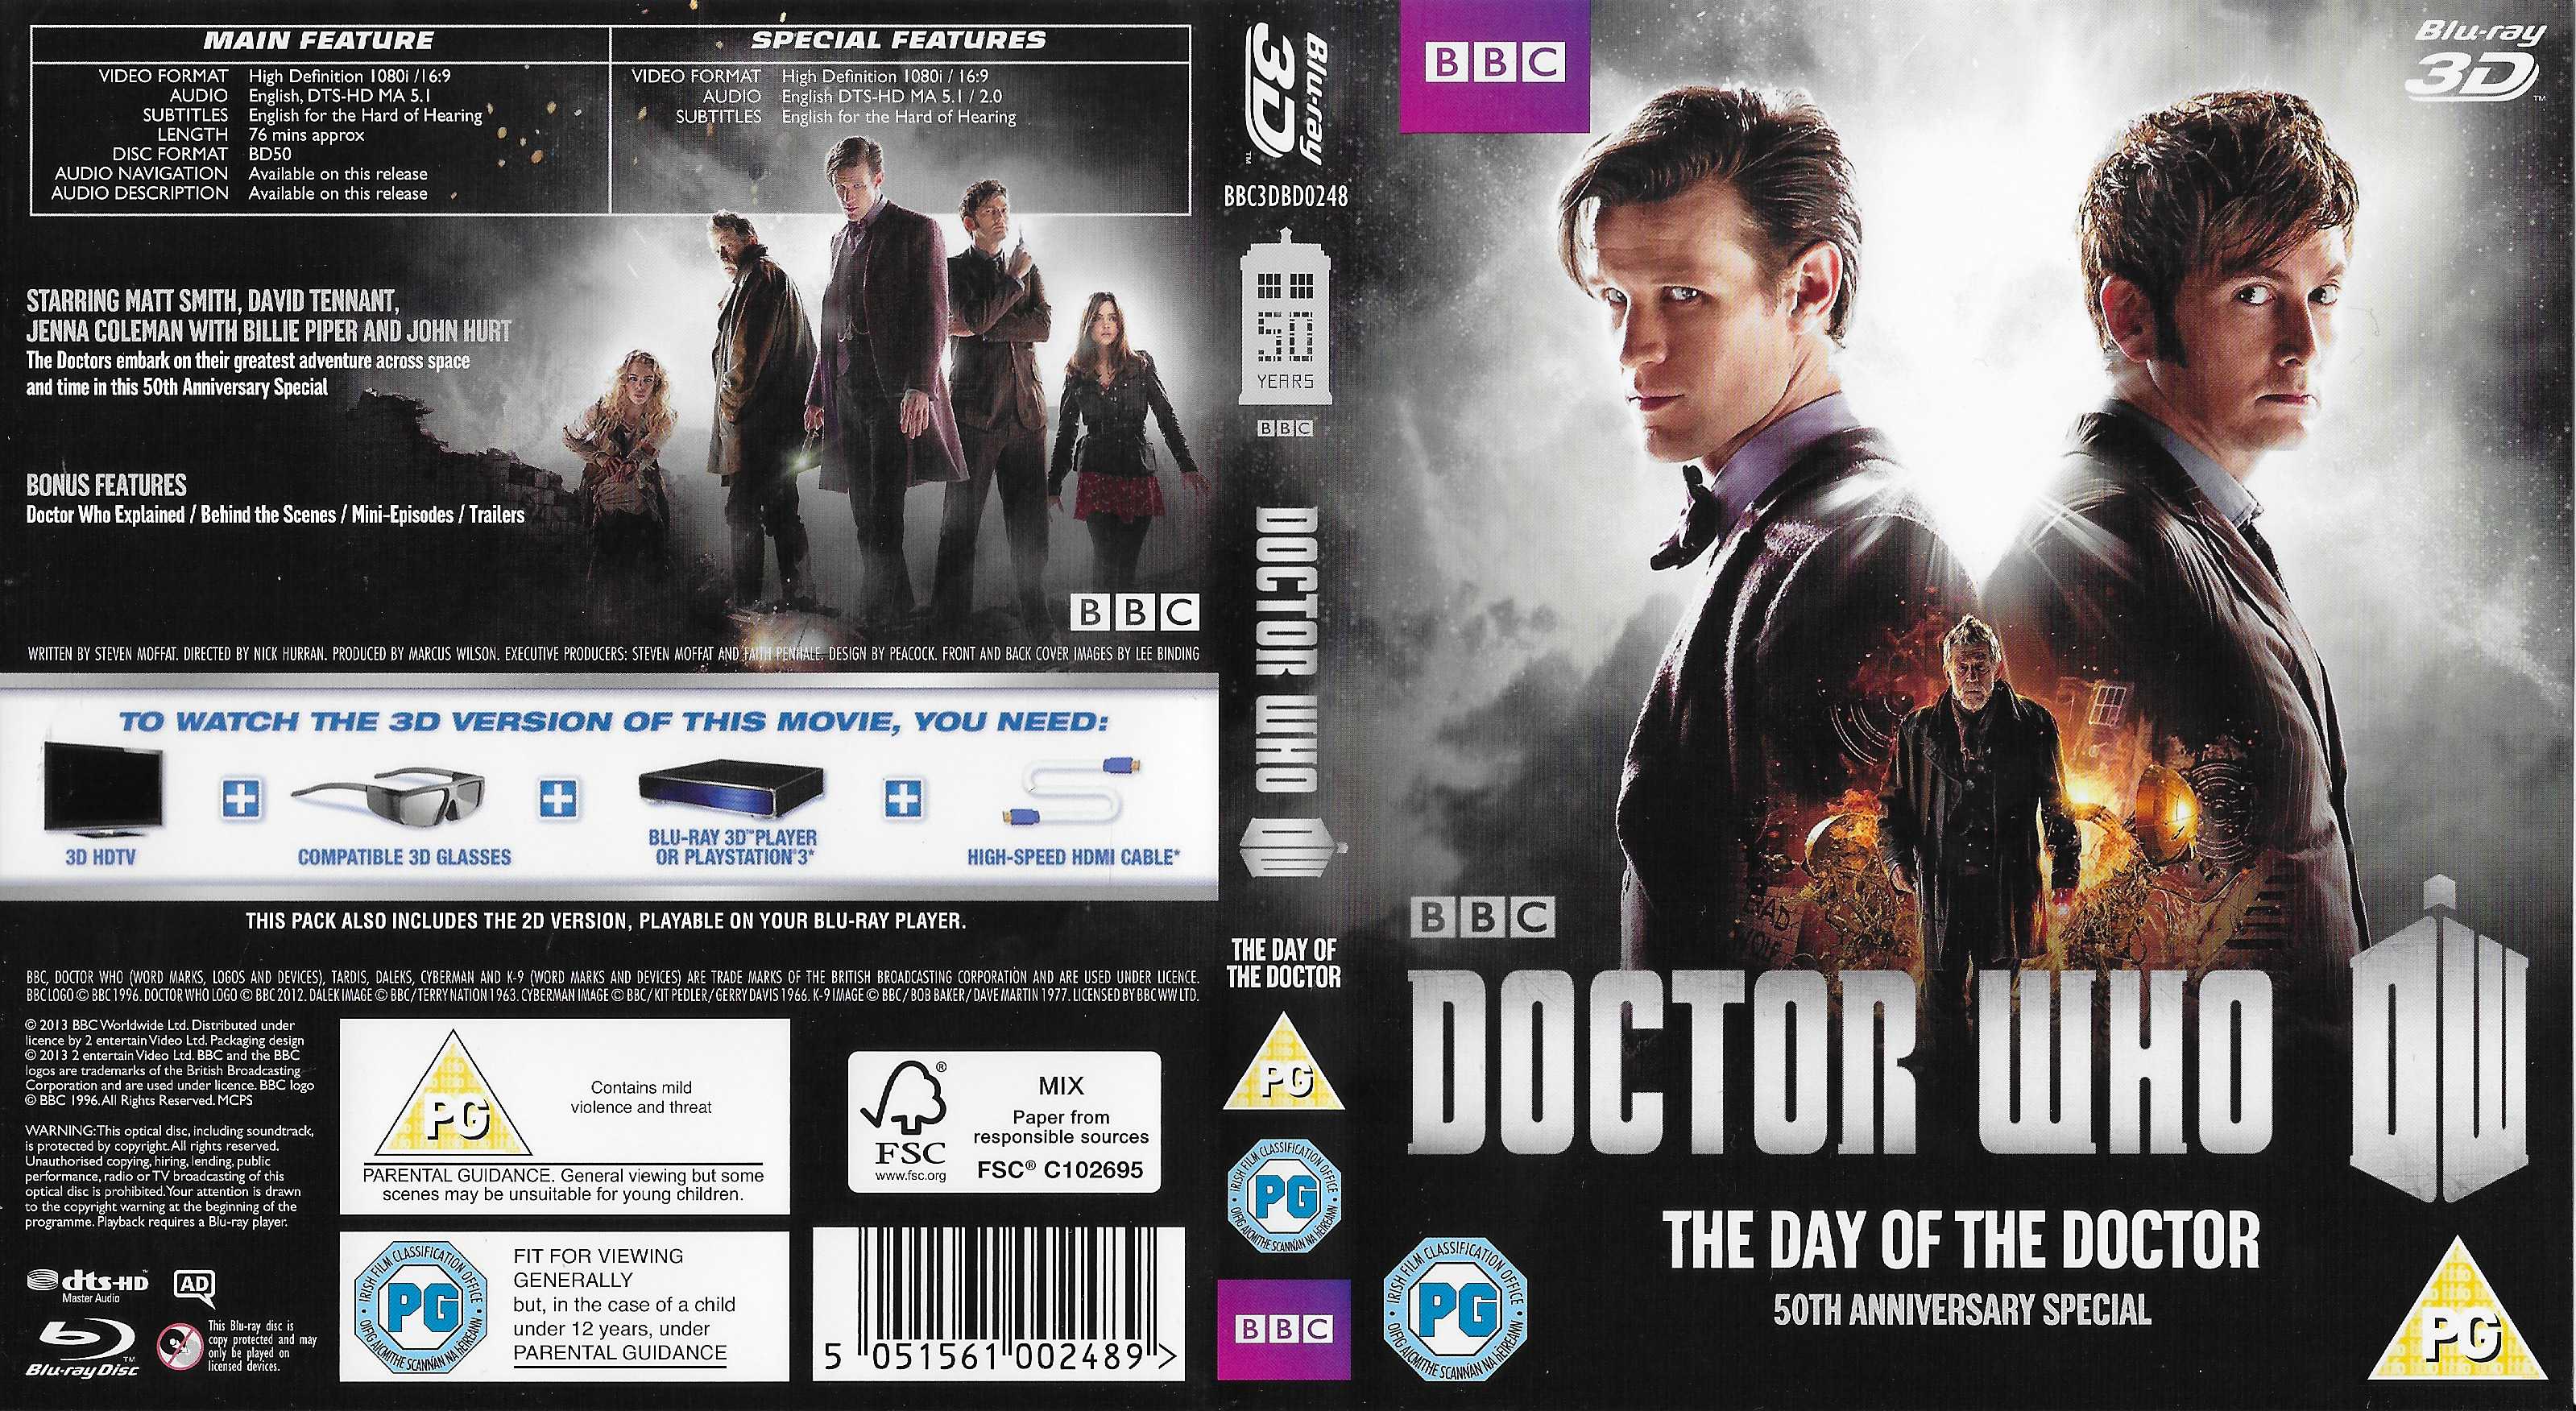 Picture of BBC3DBD 0248 Doctor Who - The day of the Doctor (50th anniversary special) by artist Steven Moffat from the BBC records and Tapes library